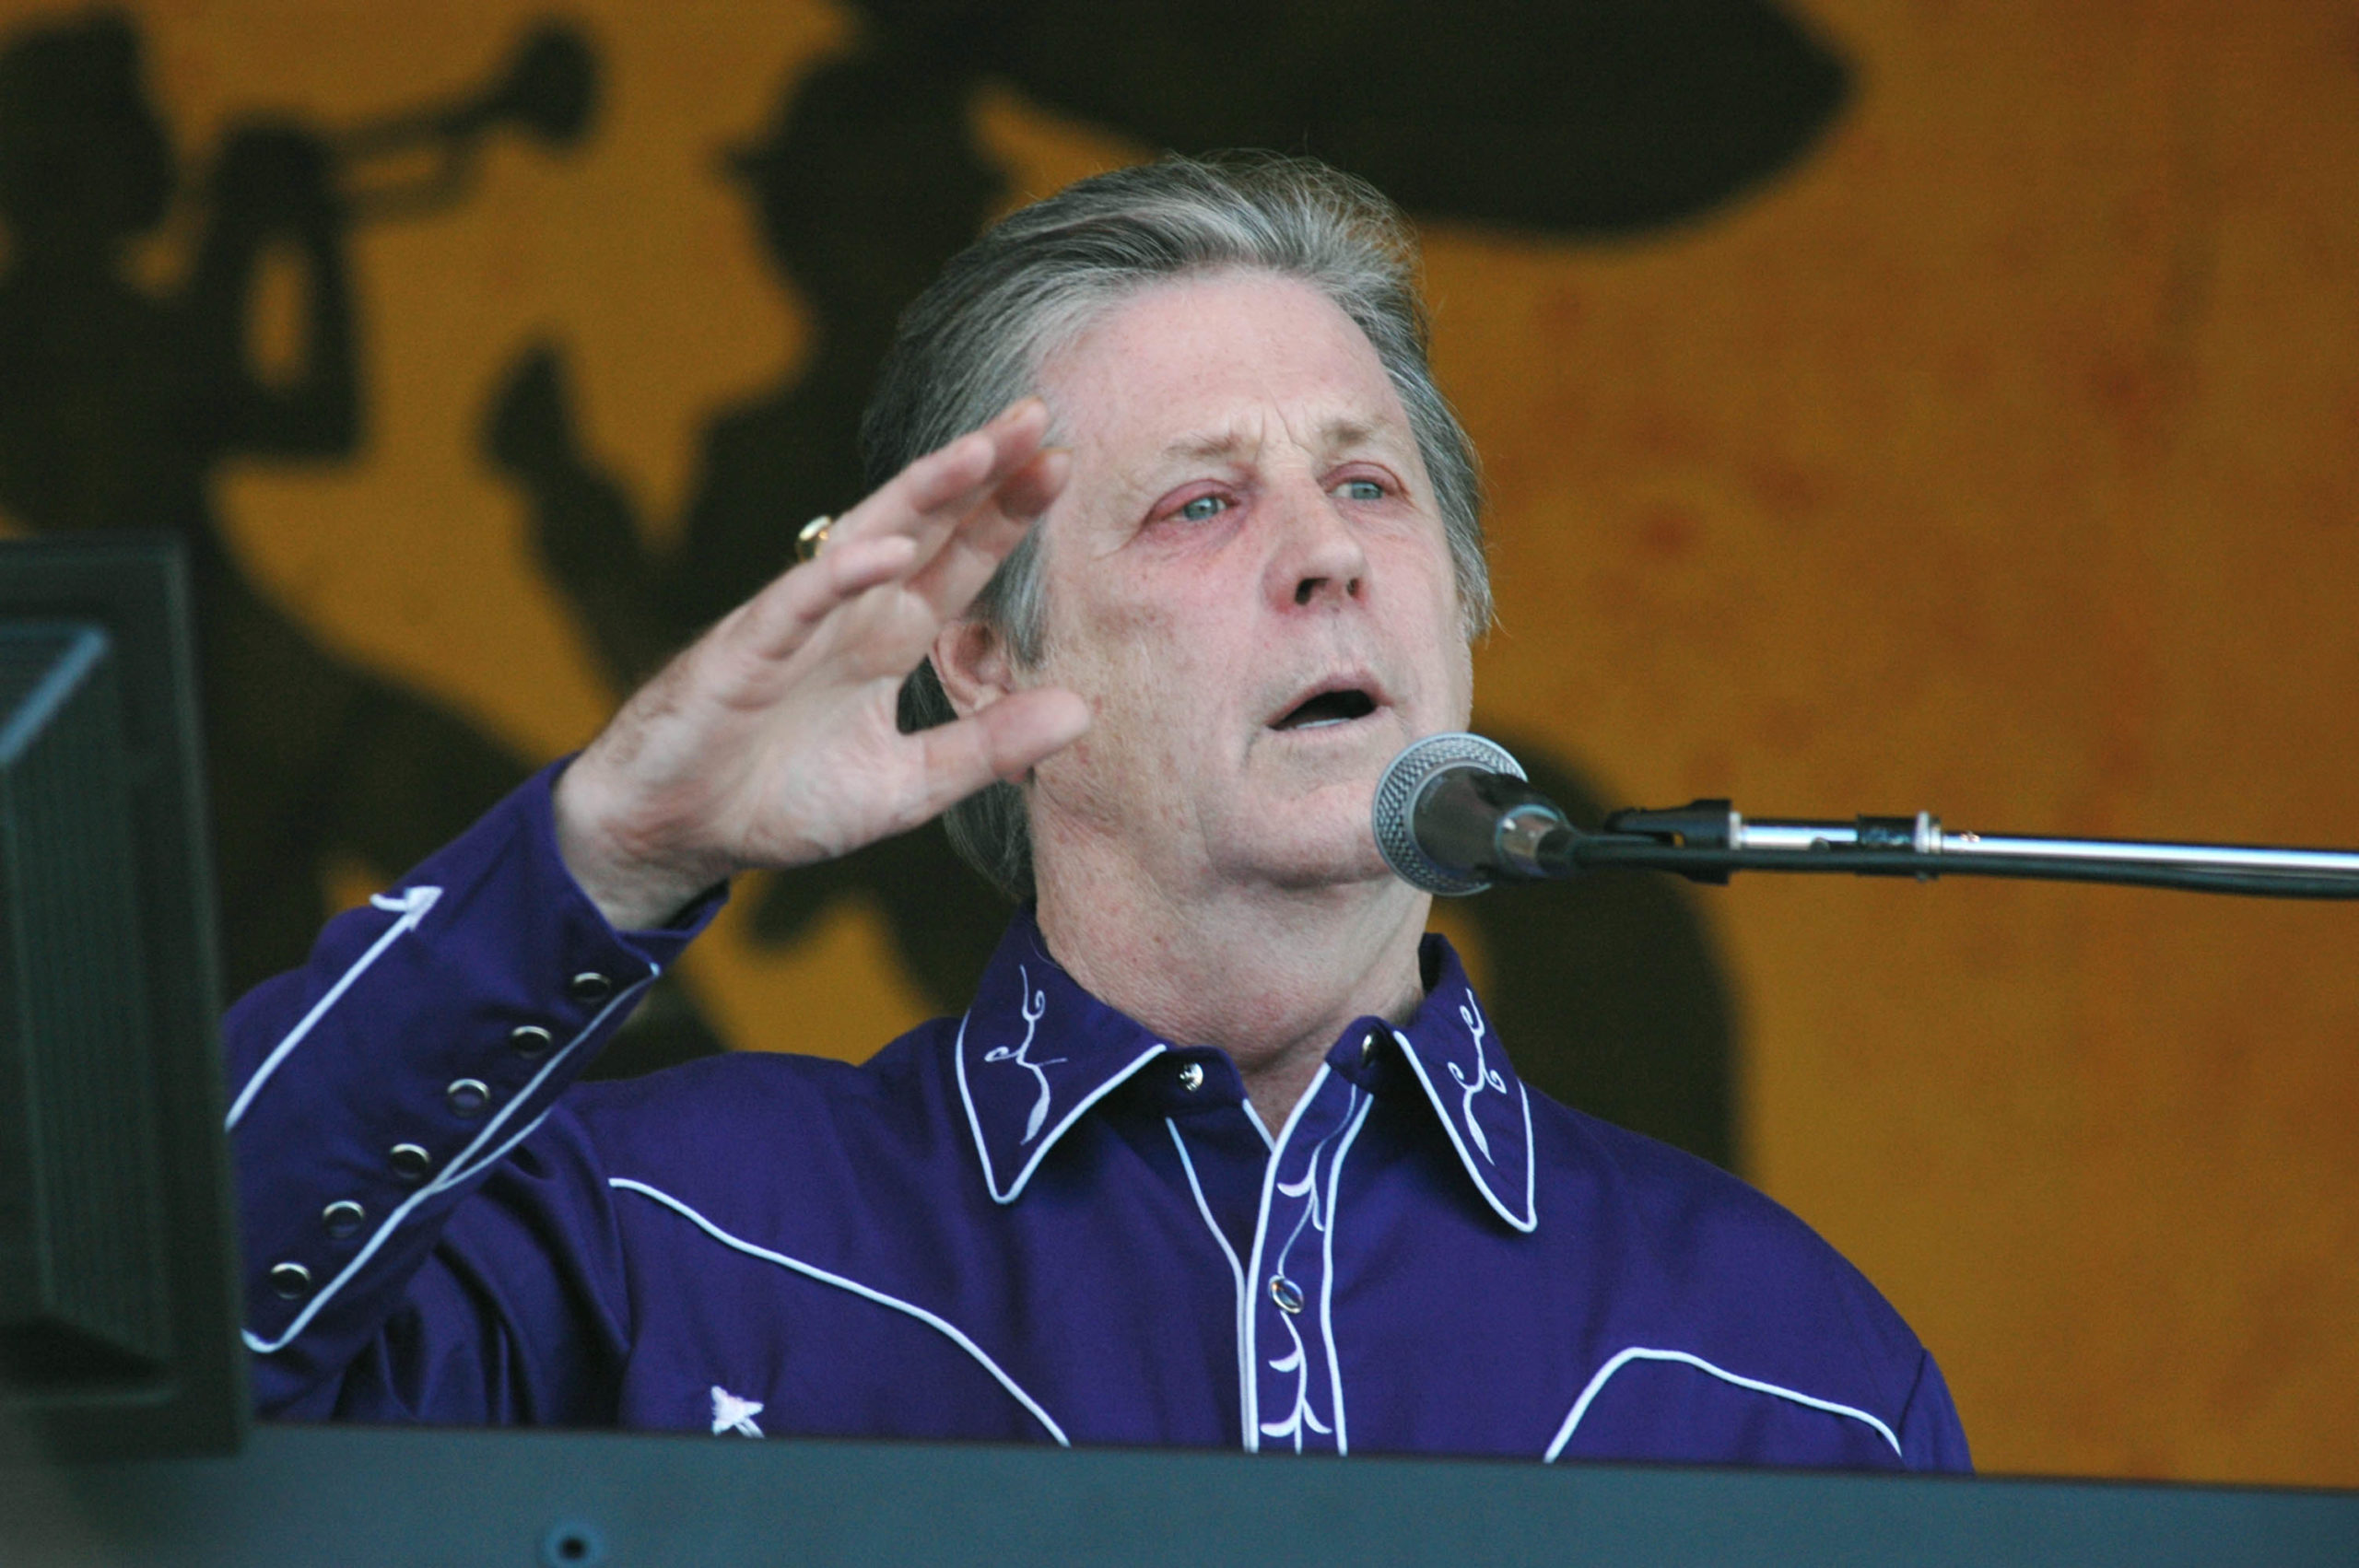 Former Beach Boy Brian Wilson performs at the 36th annual New Orleans Jazz & Heritage Festival, April 24, 2005. The Festival continues through May 1. REUTERS/David Rae Morris drm